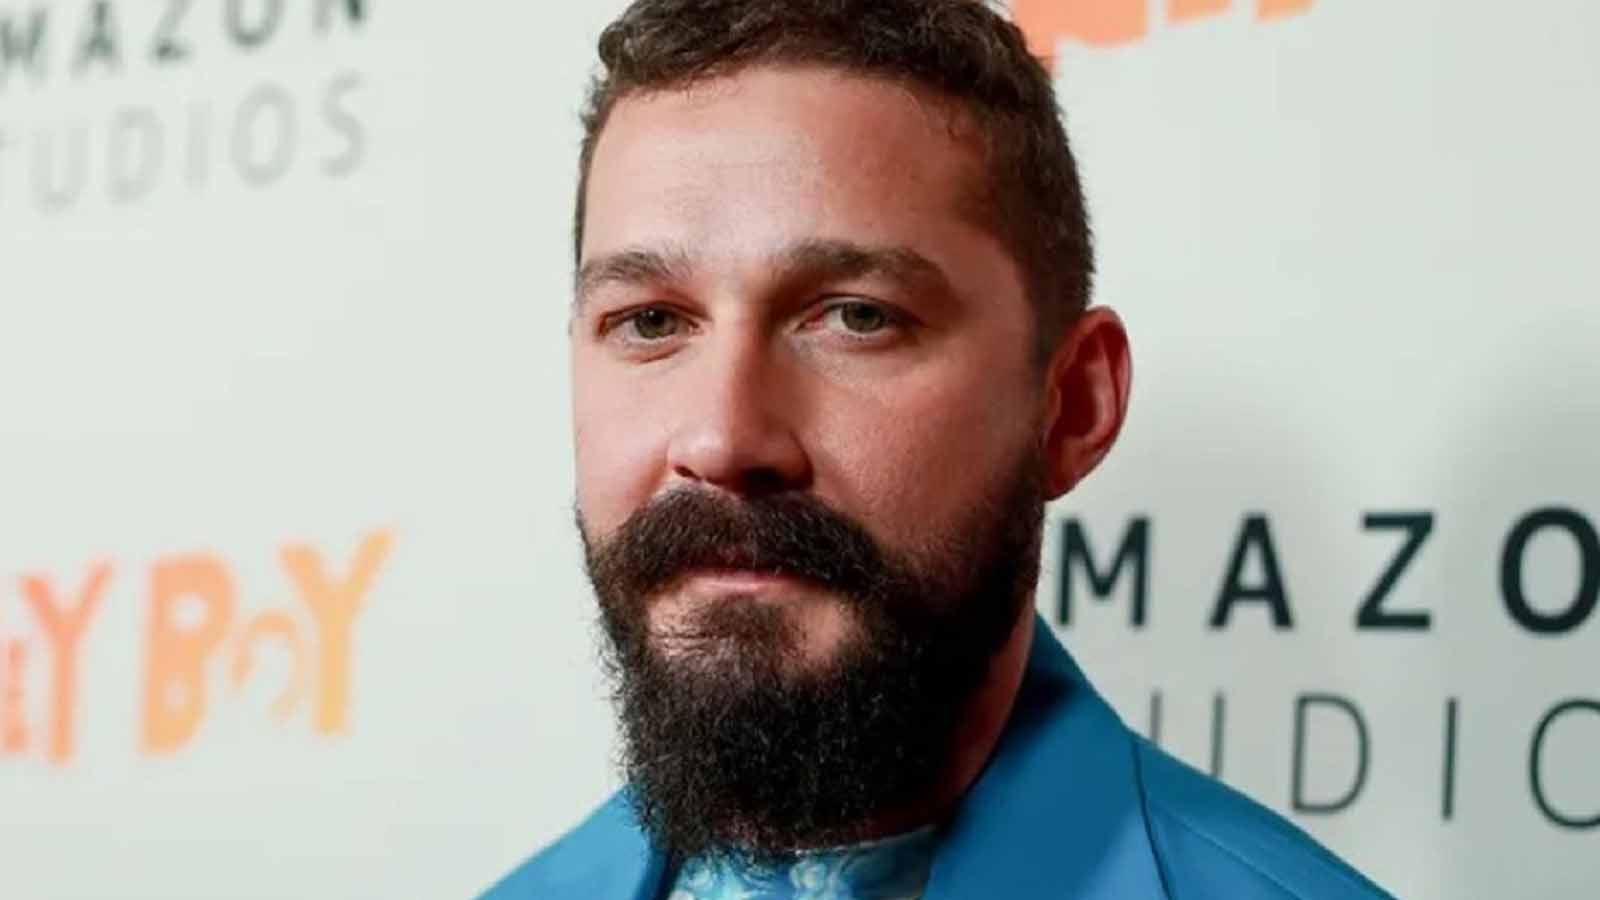 Shia Labeouf Siblings: Does He Have Any Brother Or Sister?